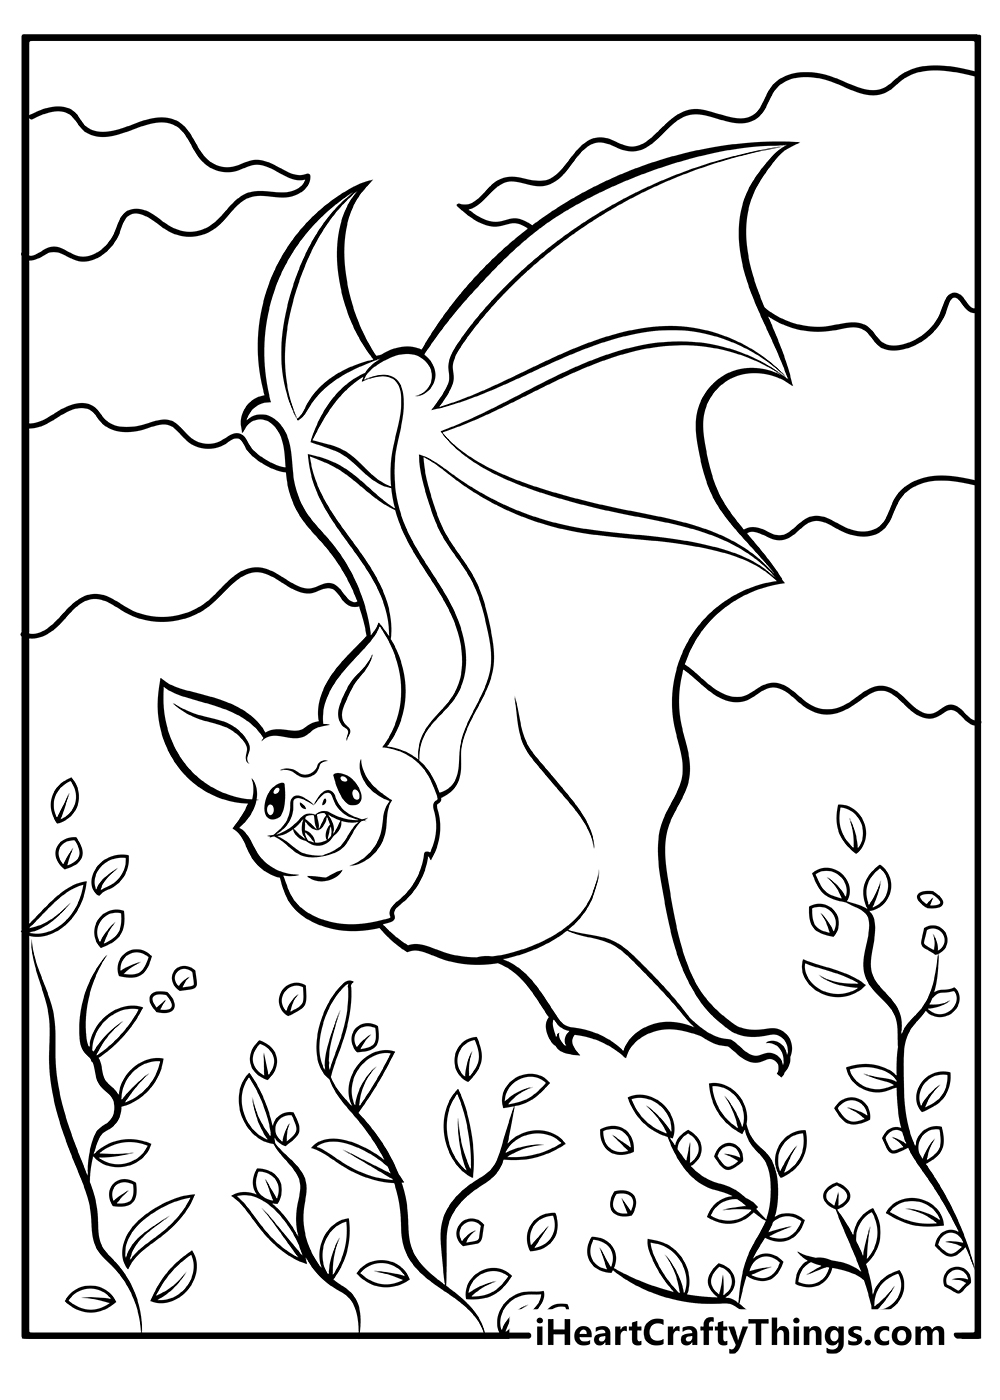 Halloween Bat Coloring Pages free download pdf